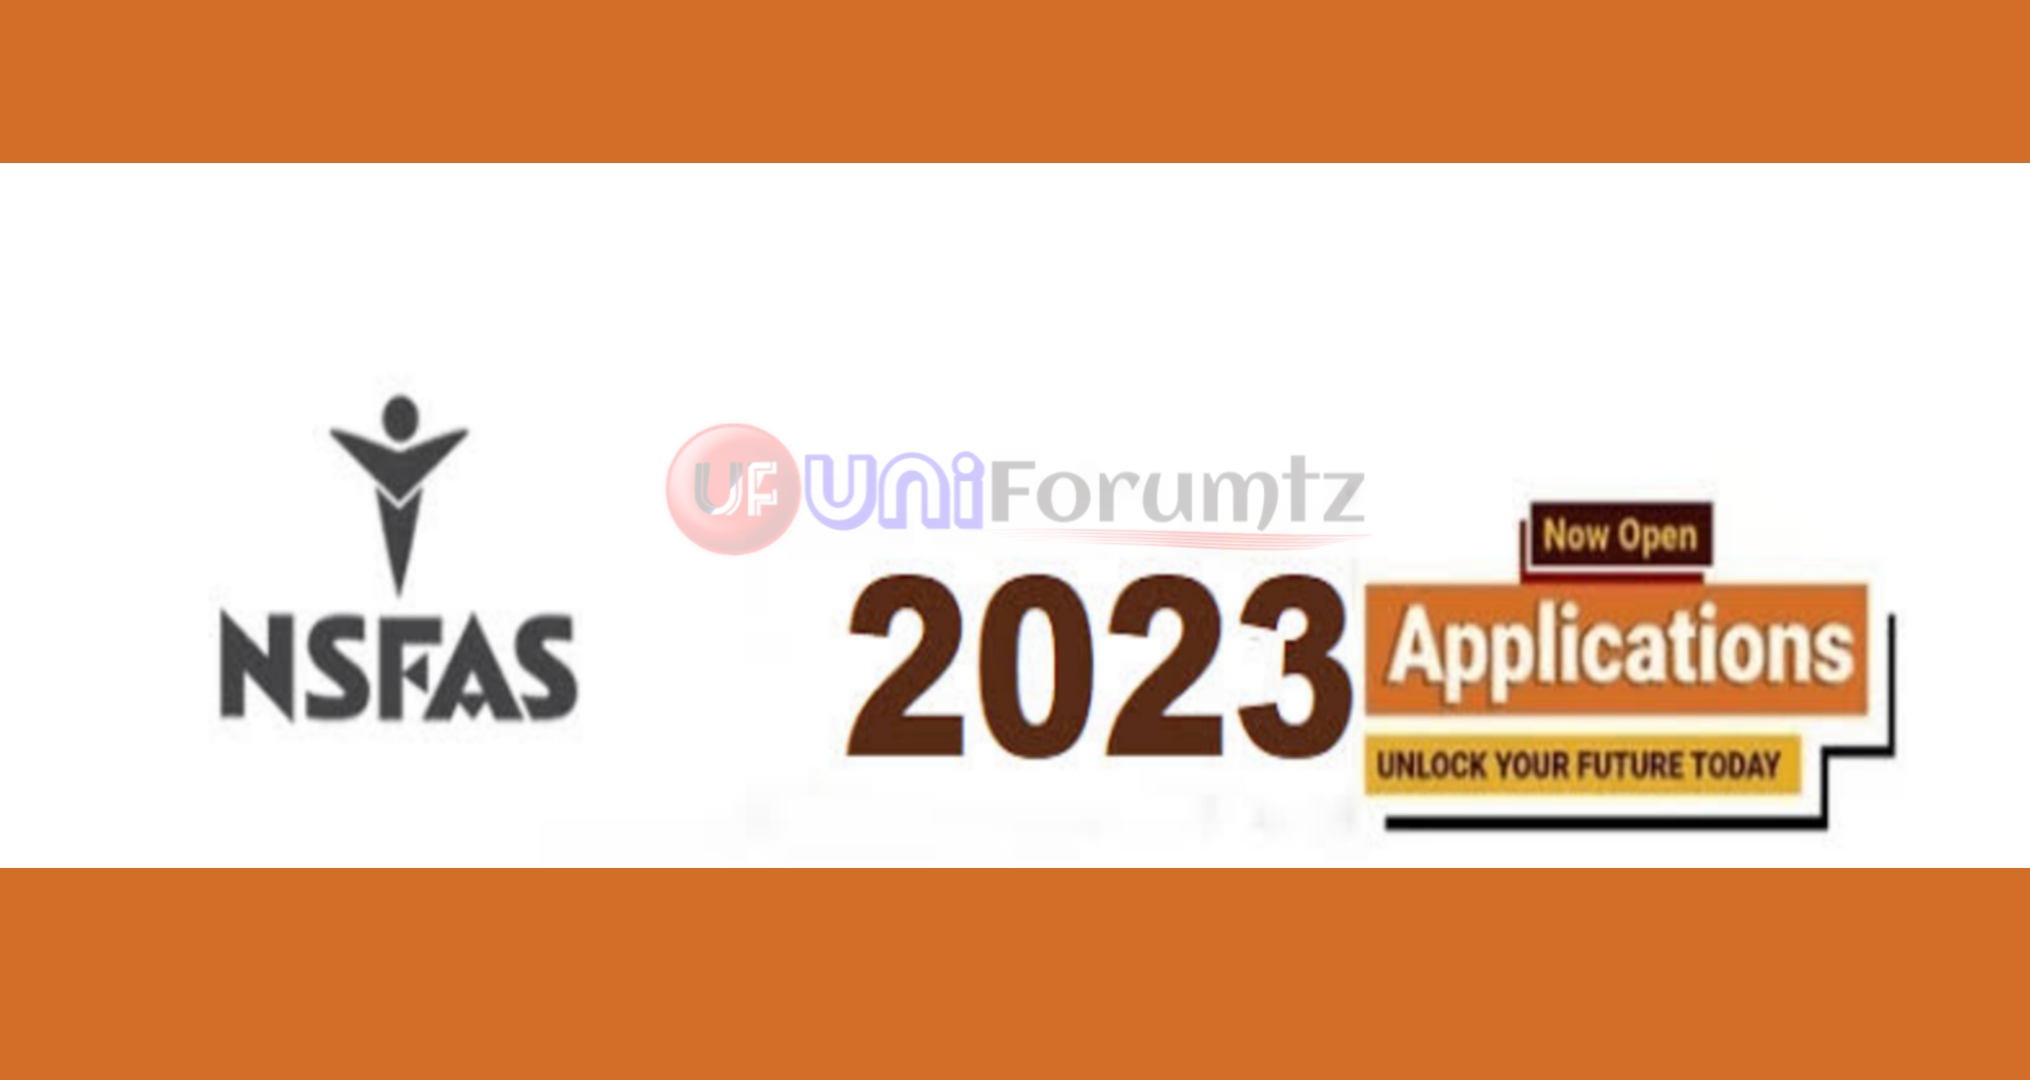 NSFAS Application 2023 Opening Date